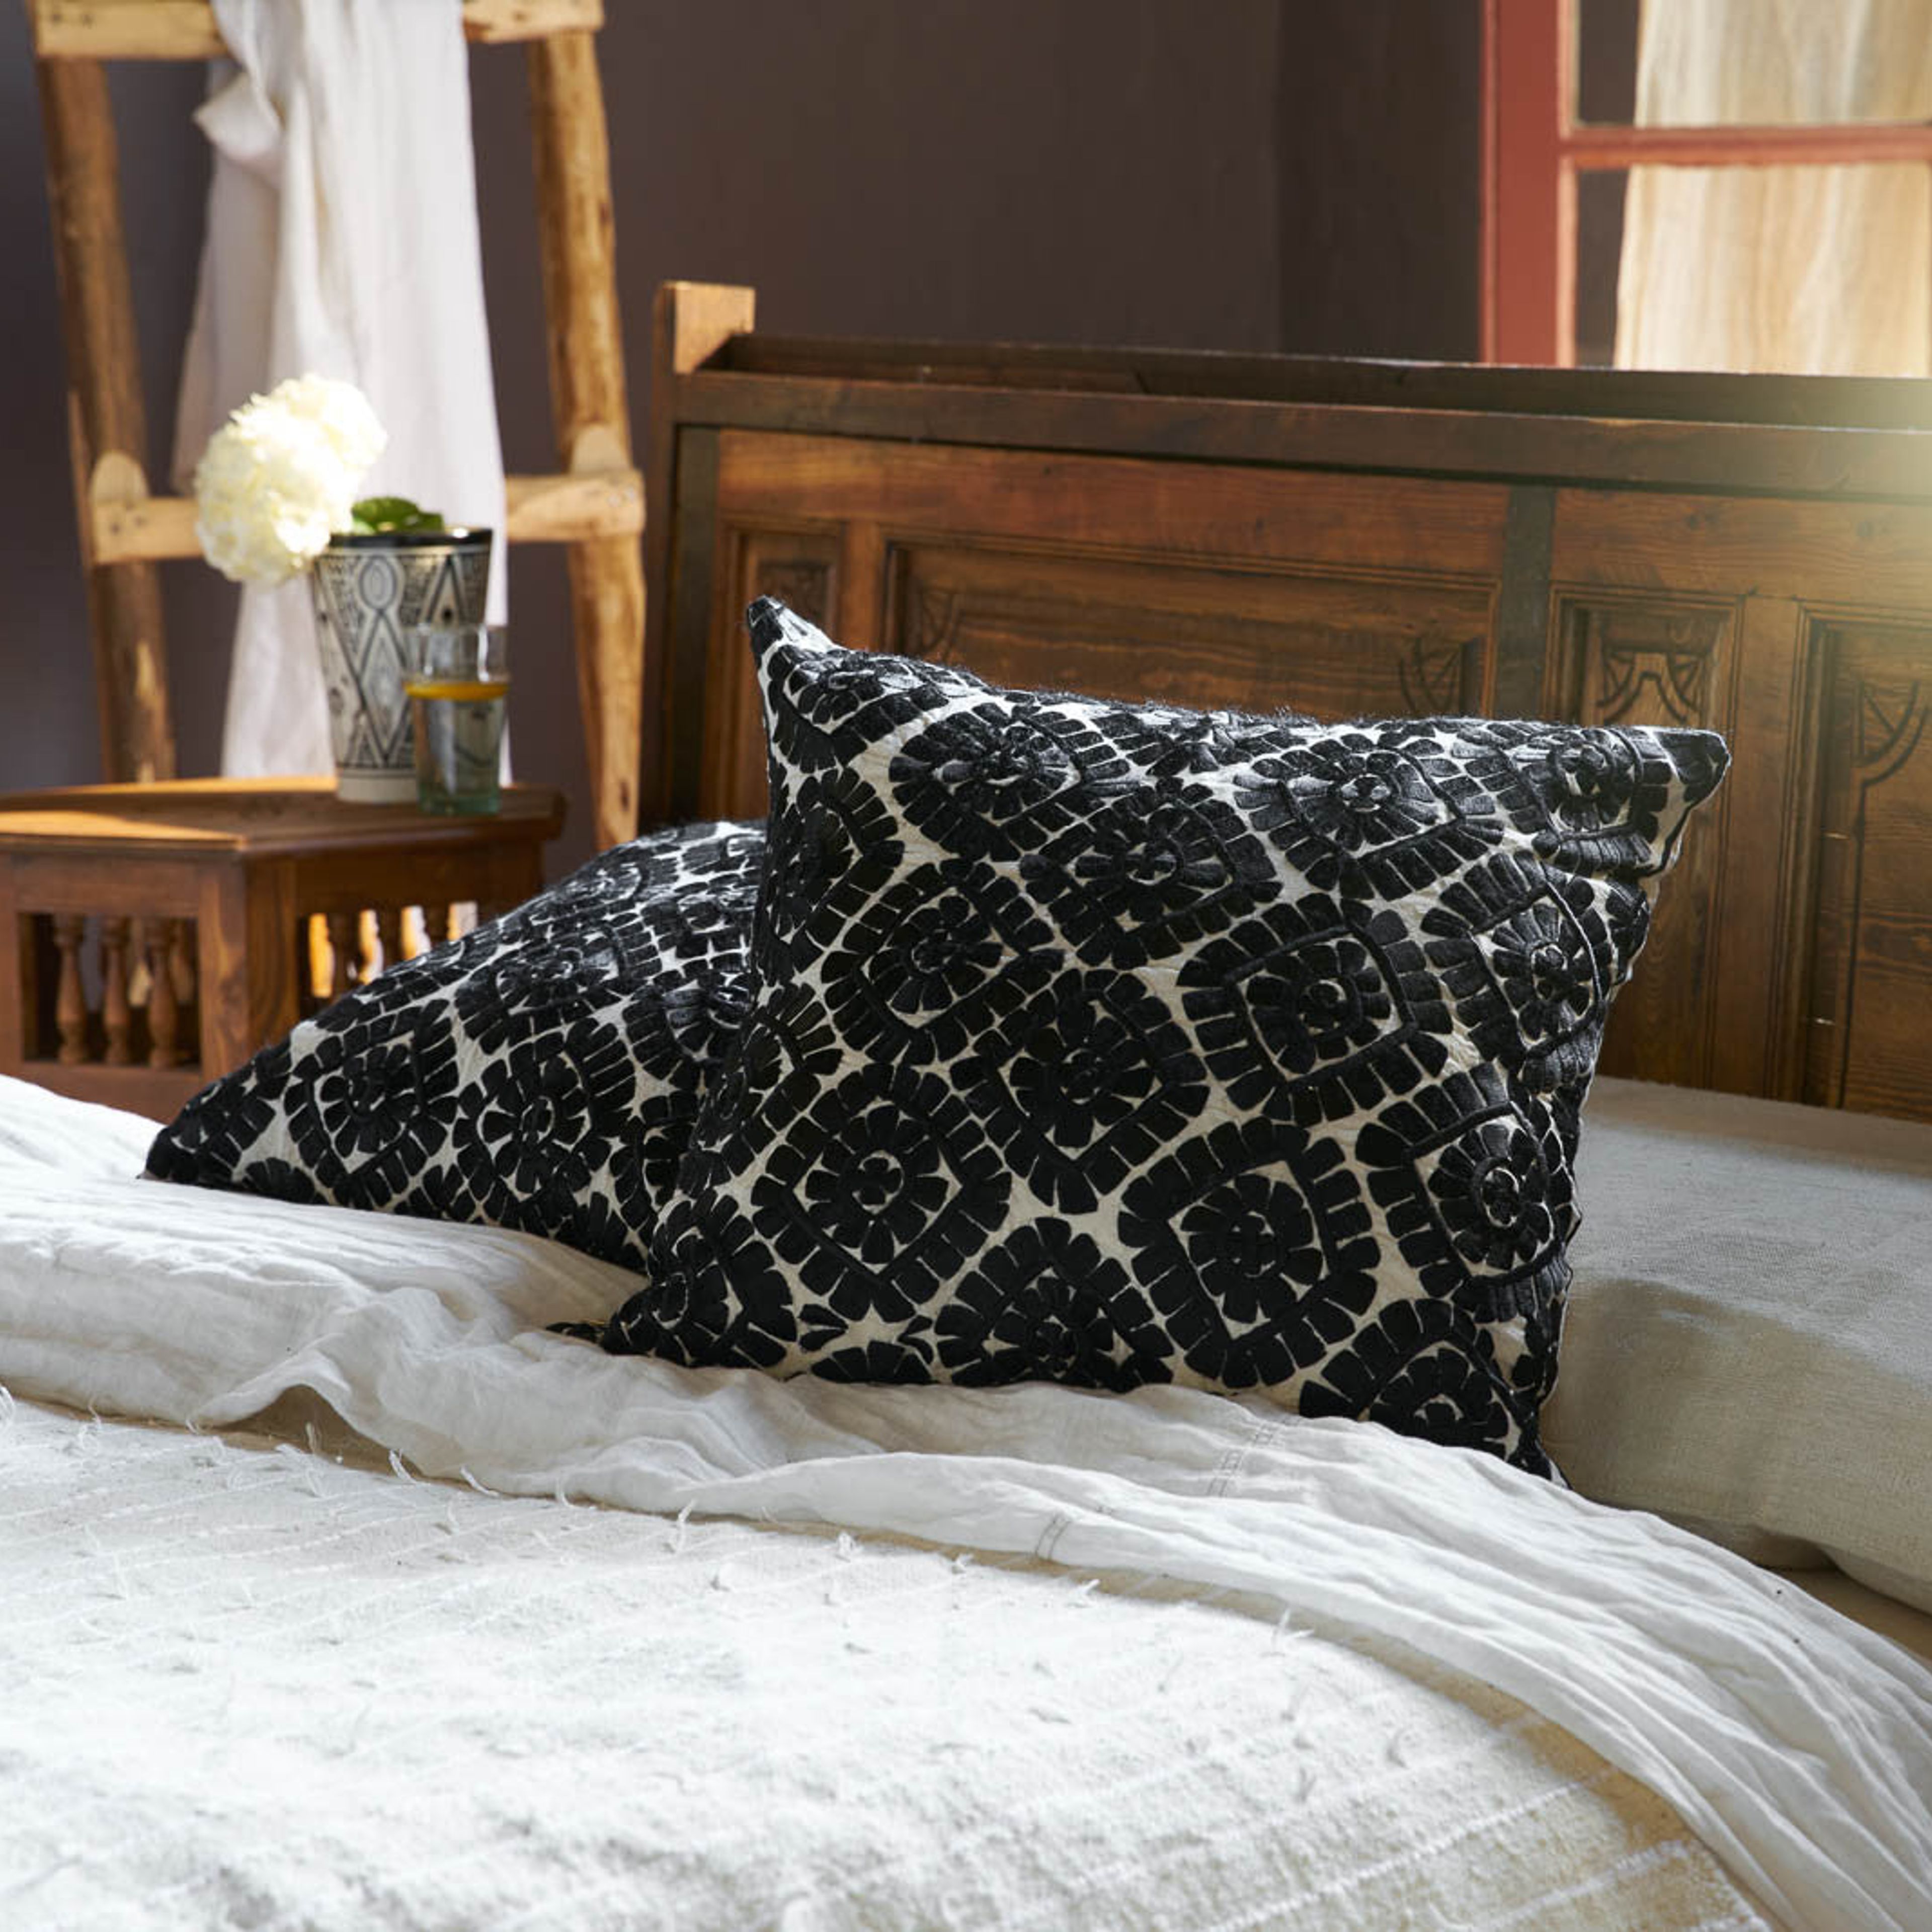 Moroccan Embroidered Pillow, Black